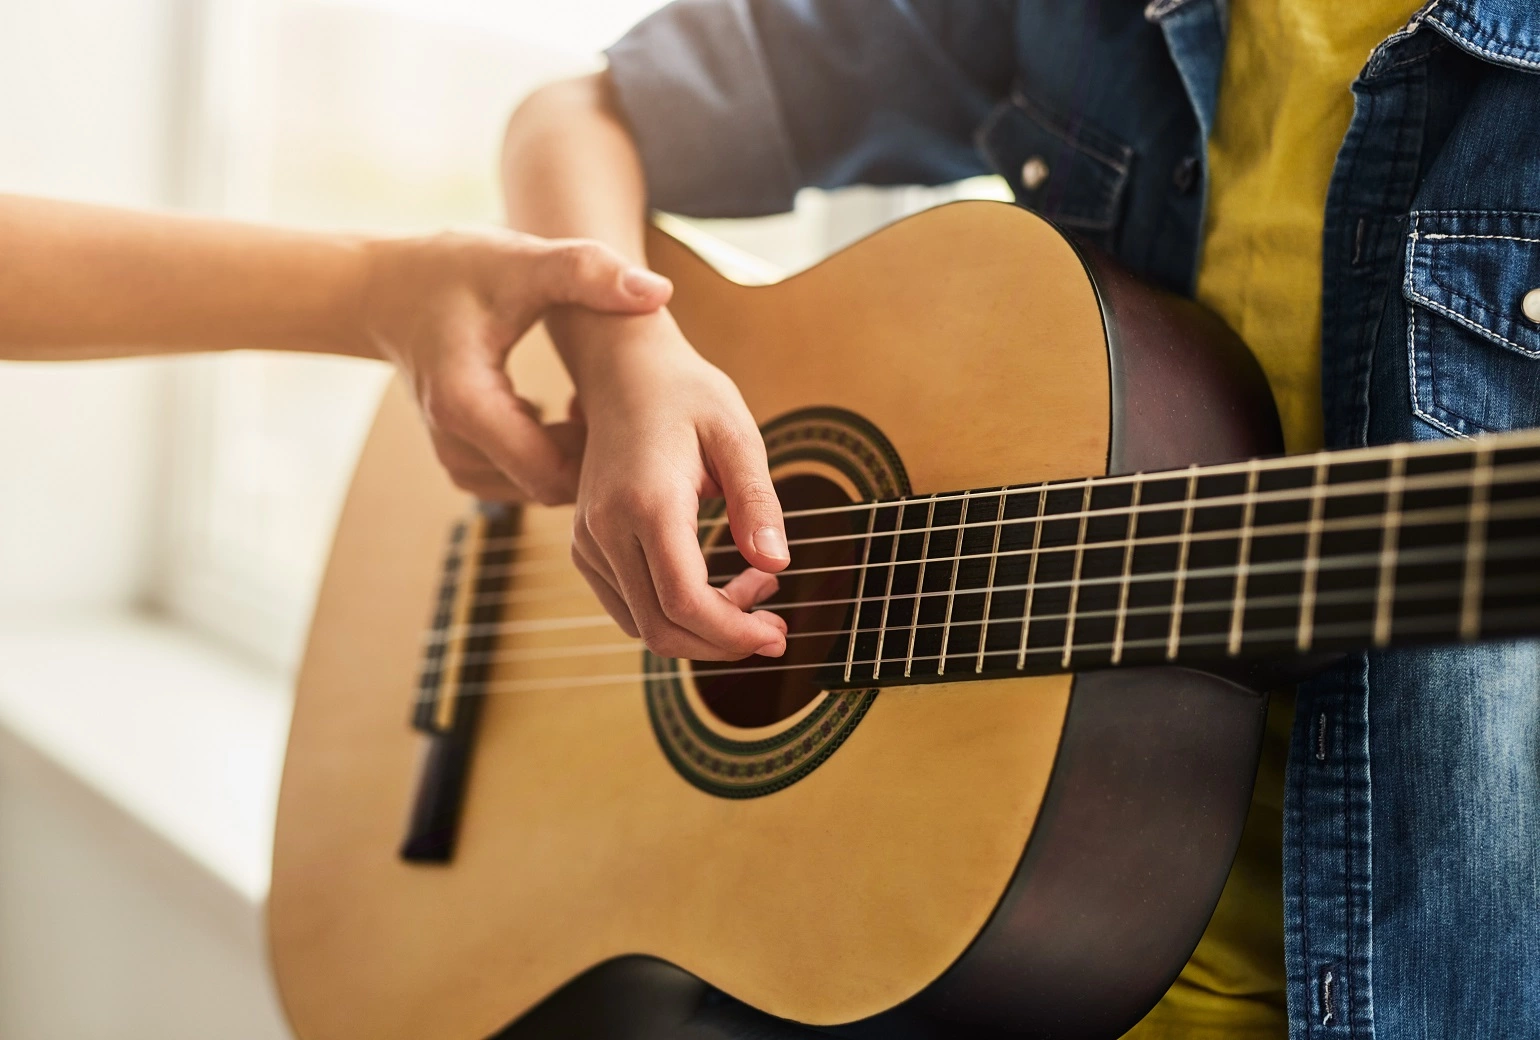 Learning an instrument: When should one start playing the guitar?